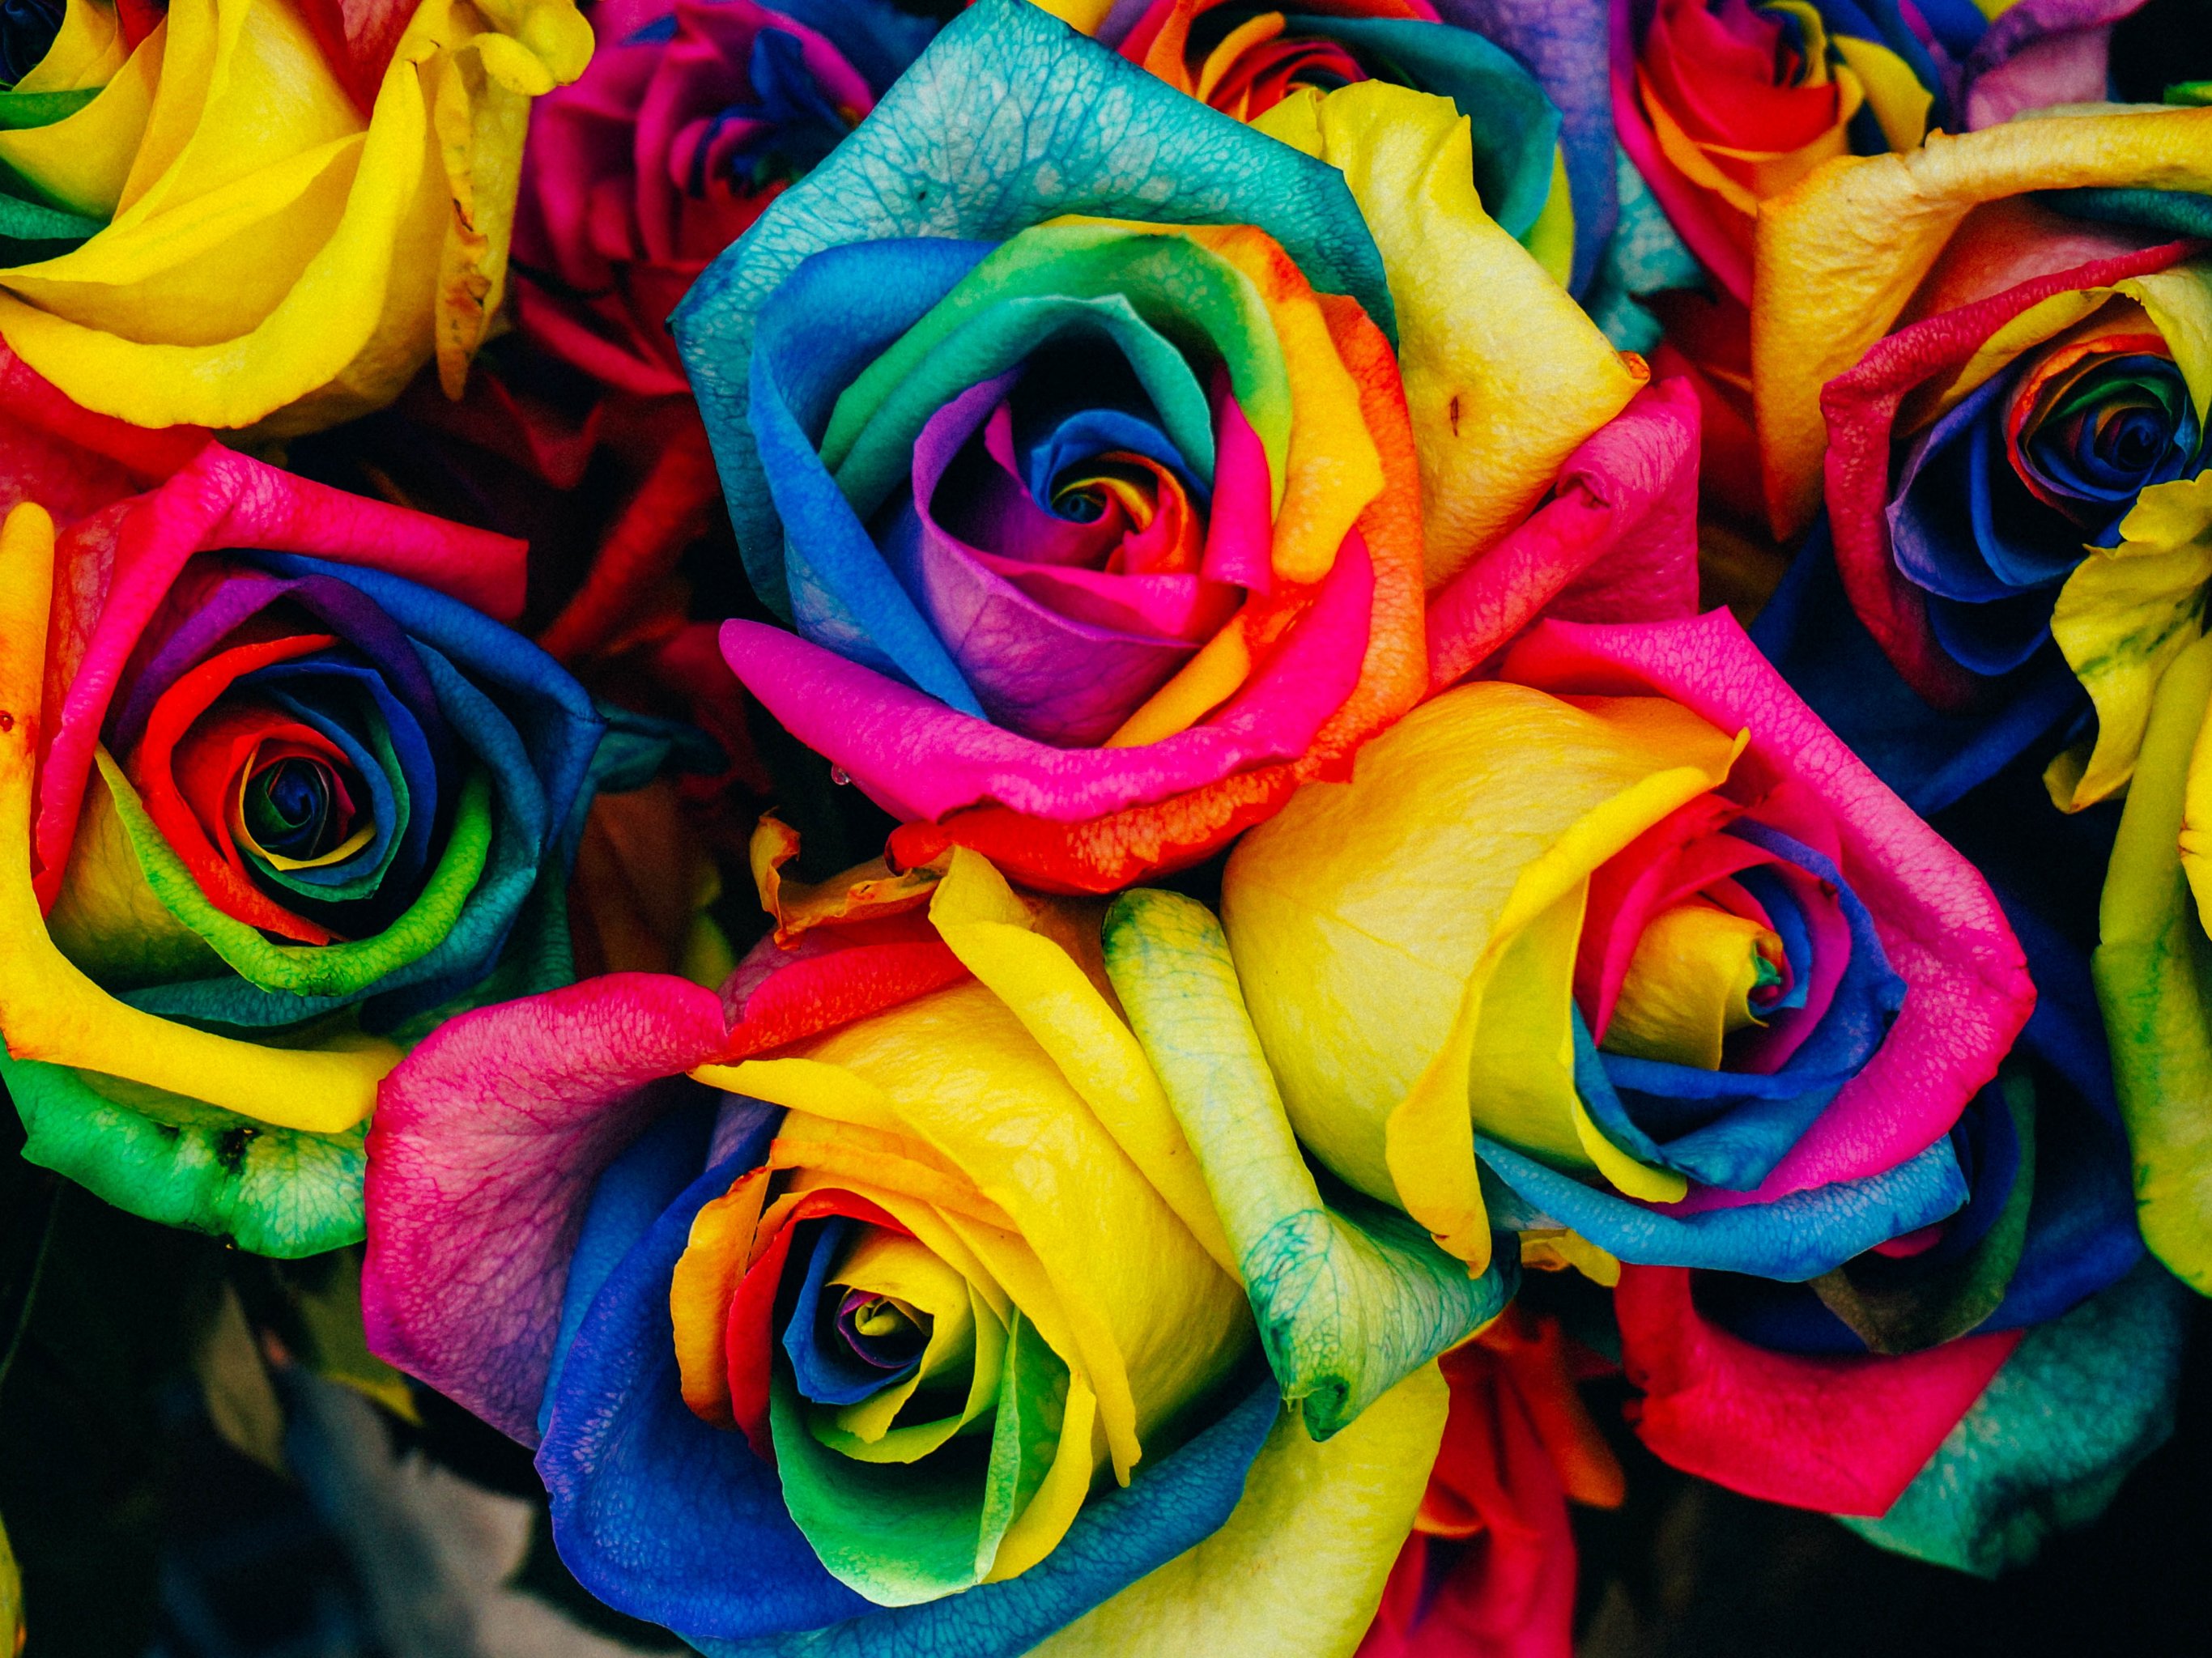 Rainbow Roses Wallpaper - iPhone, Android & Desktop Backgrounds